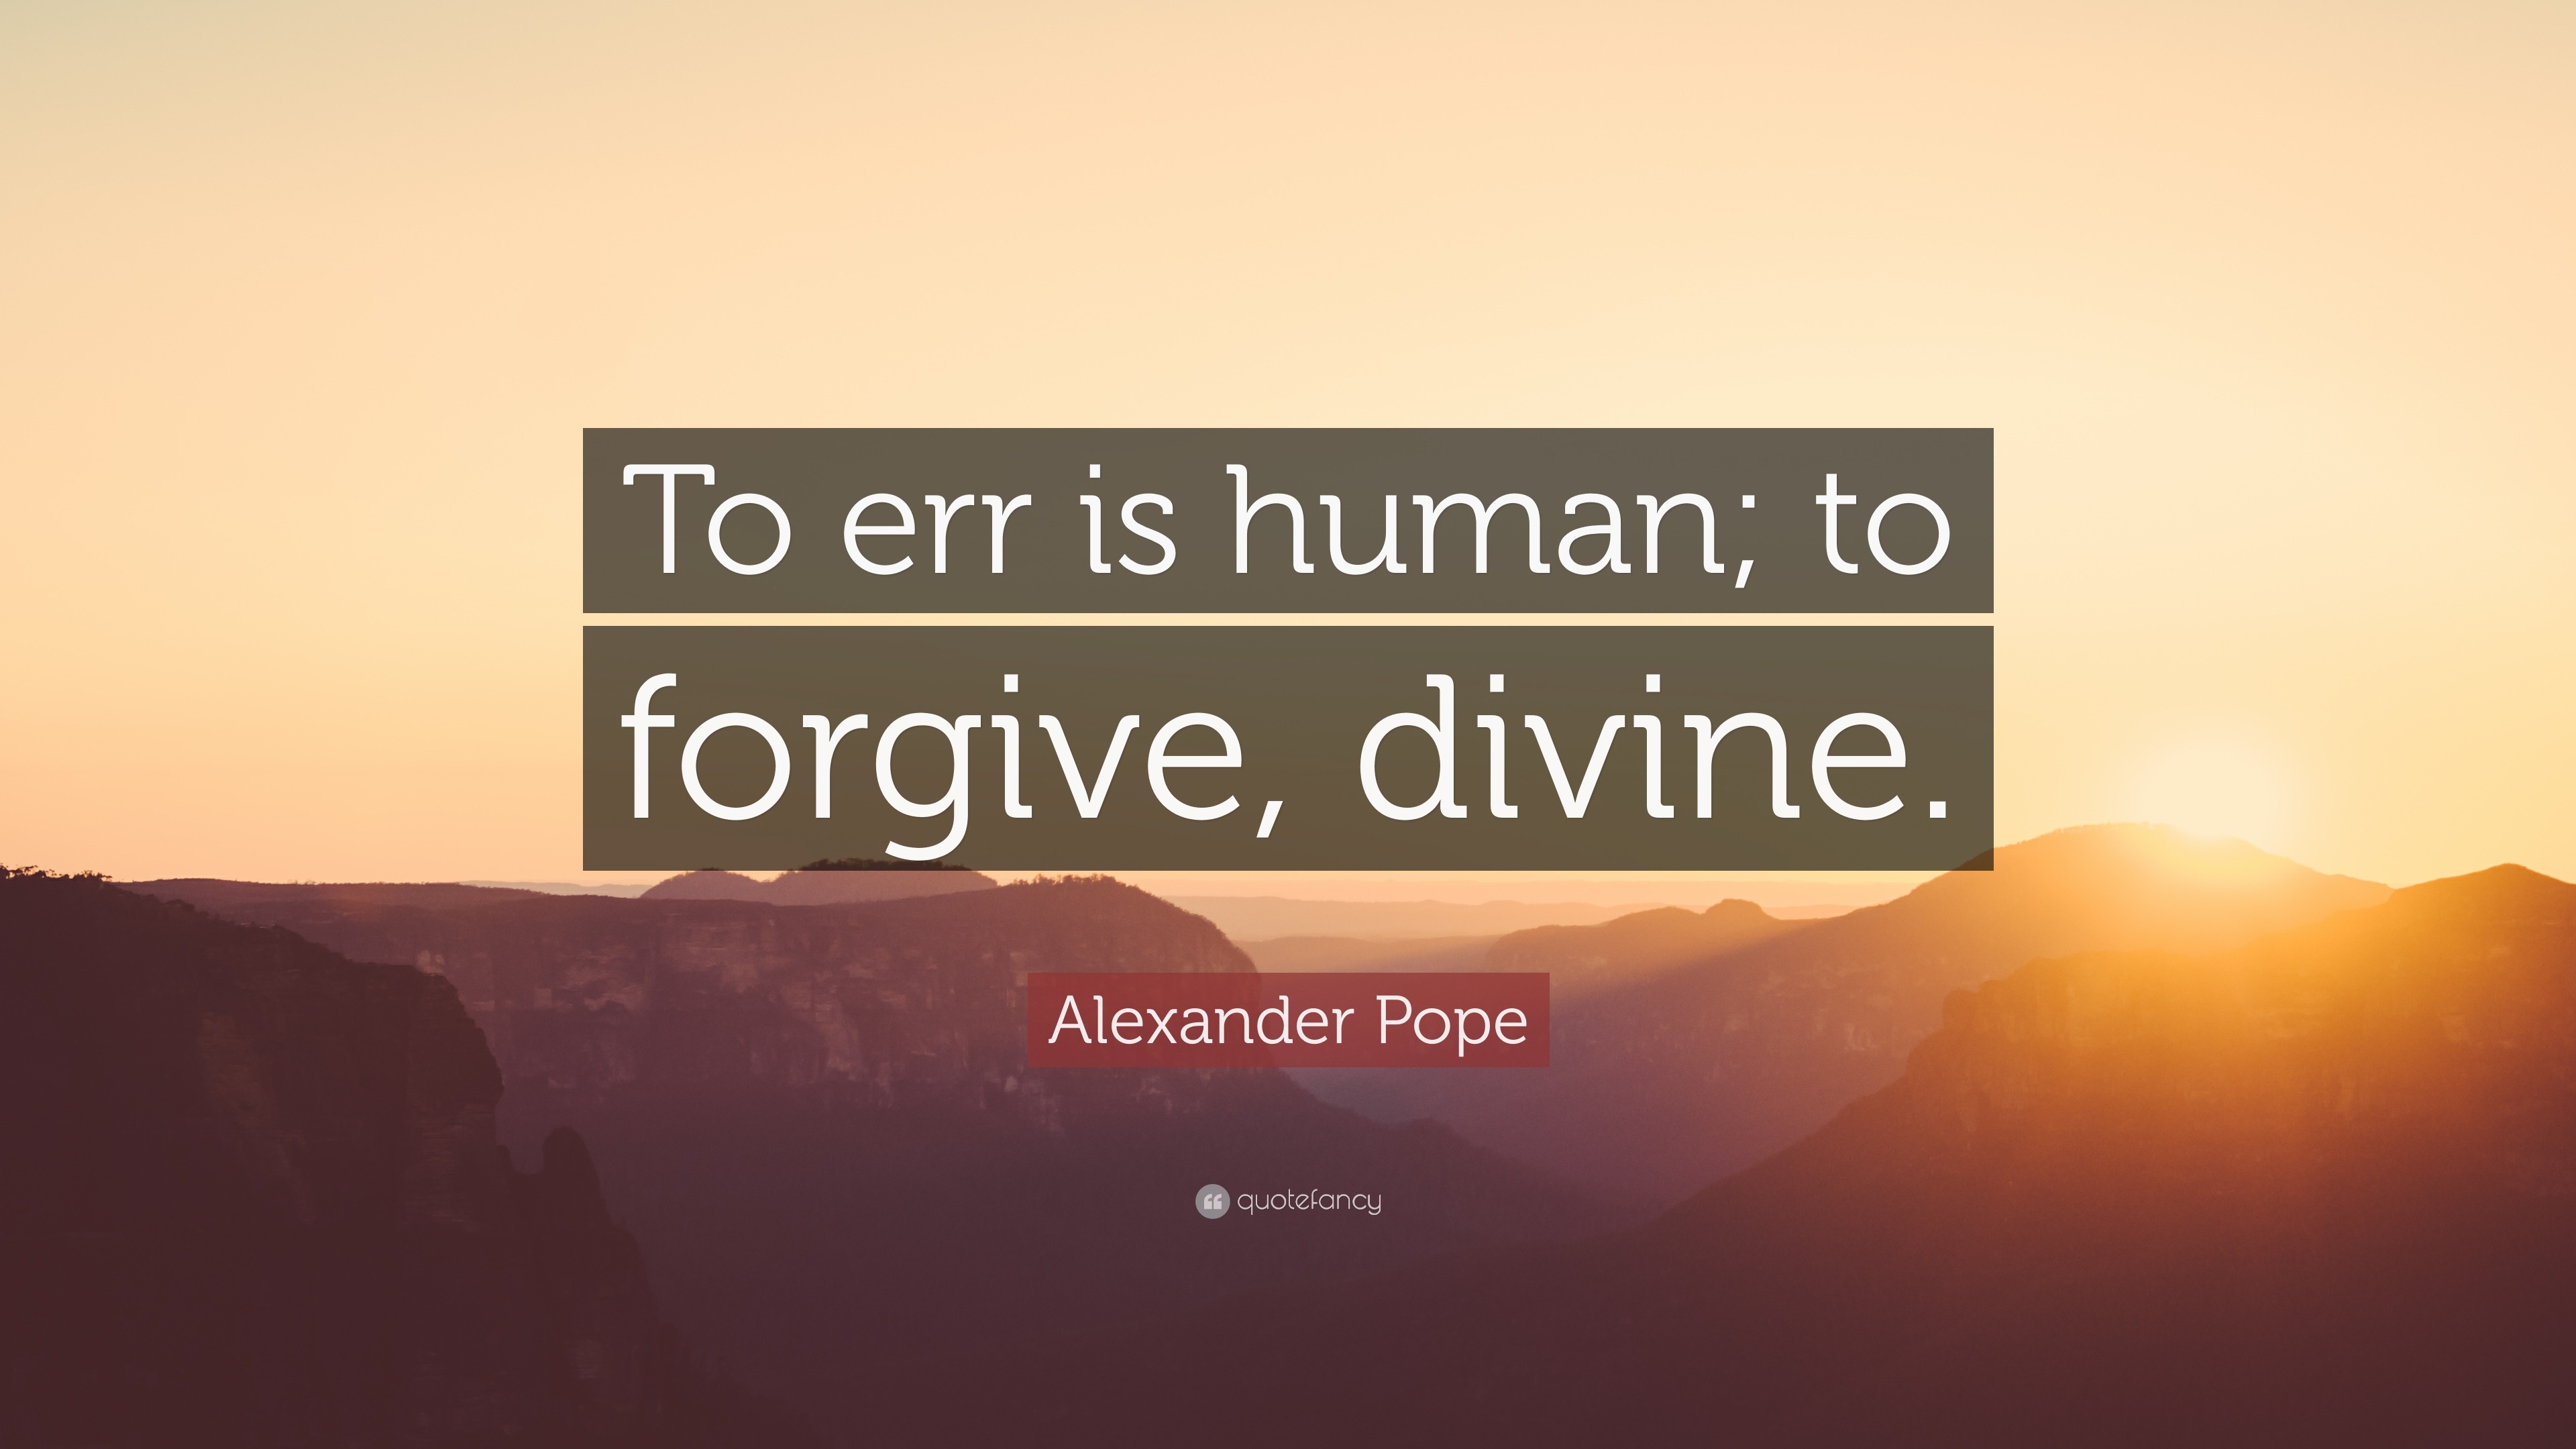 Alexander Pope Quote: “To err is human; to forgive, divine.” (20